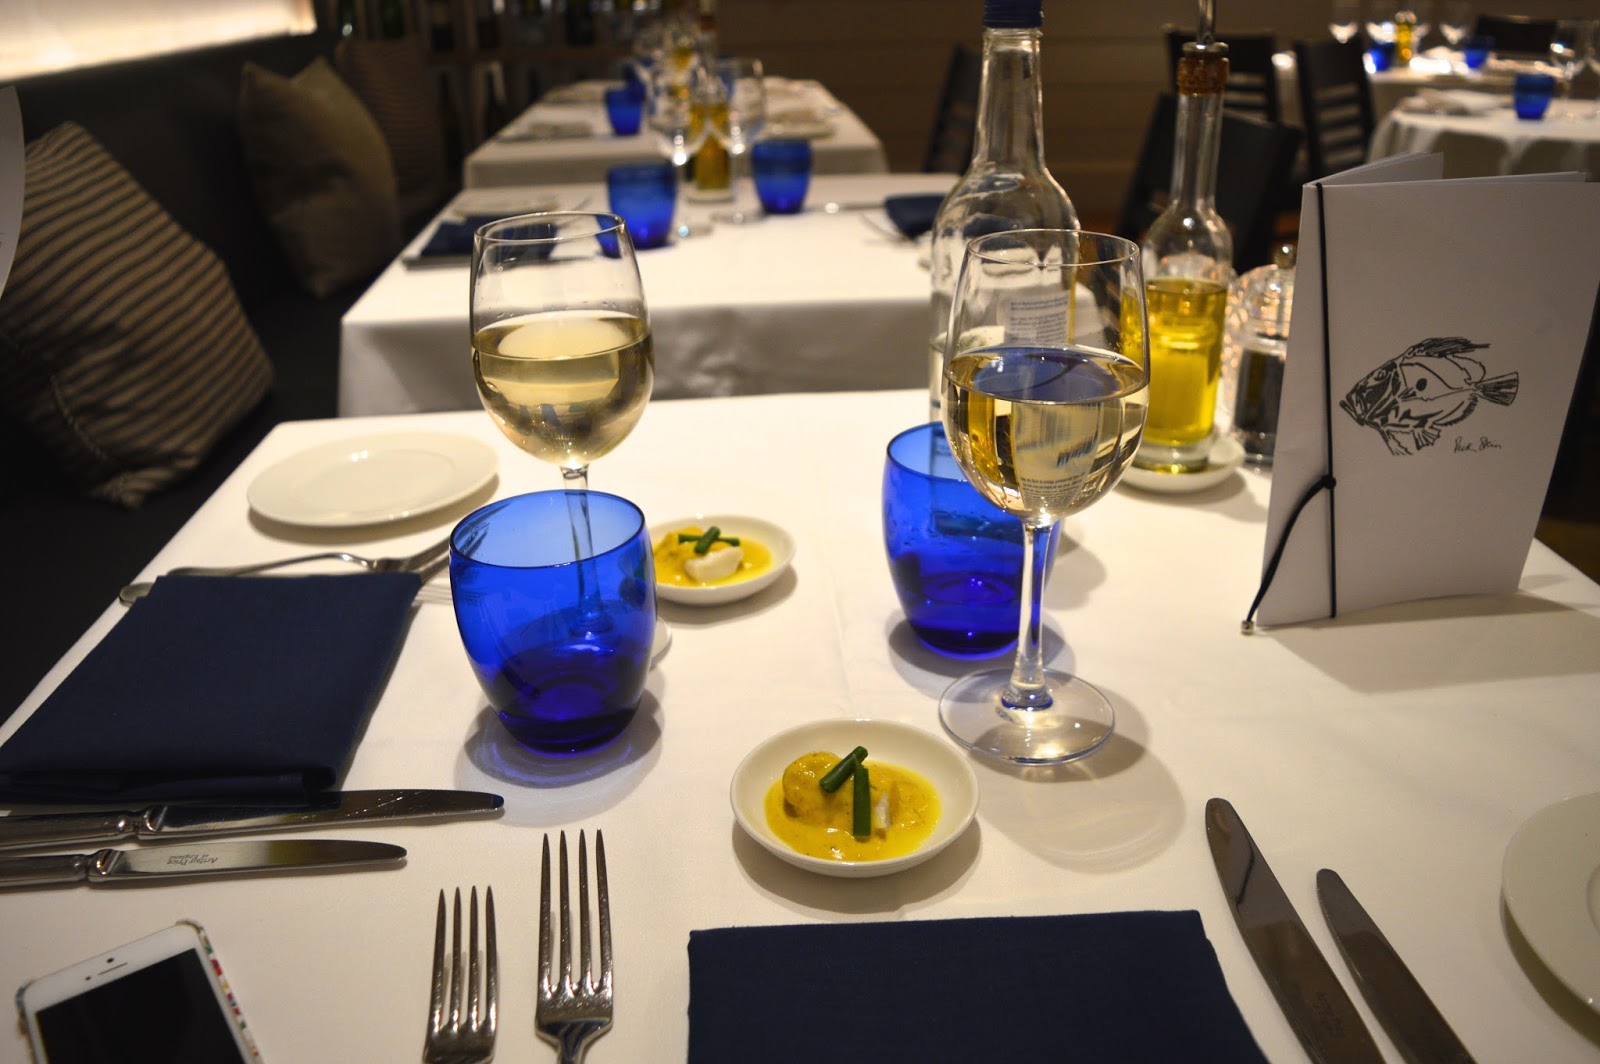 Rick Stein Winchester review, Rick Stein restaurant, food bloggers, Hampshire food blogger